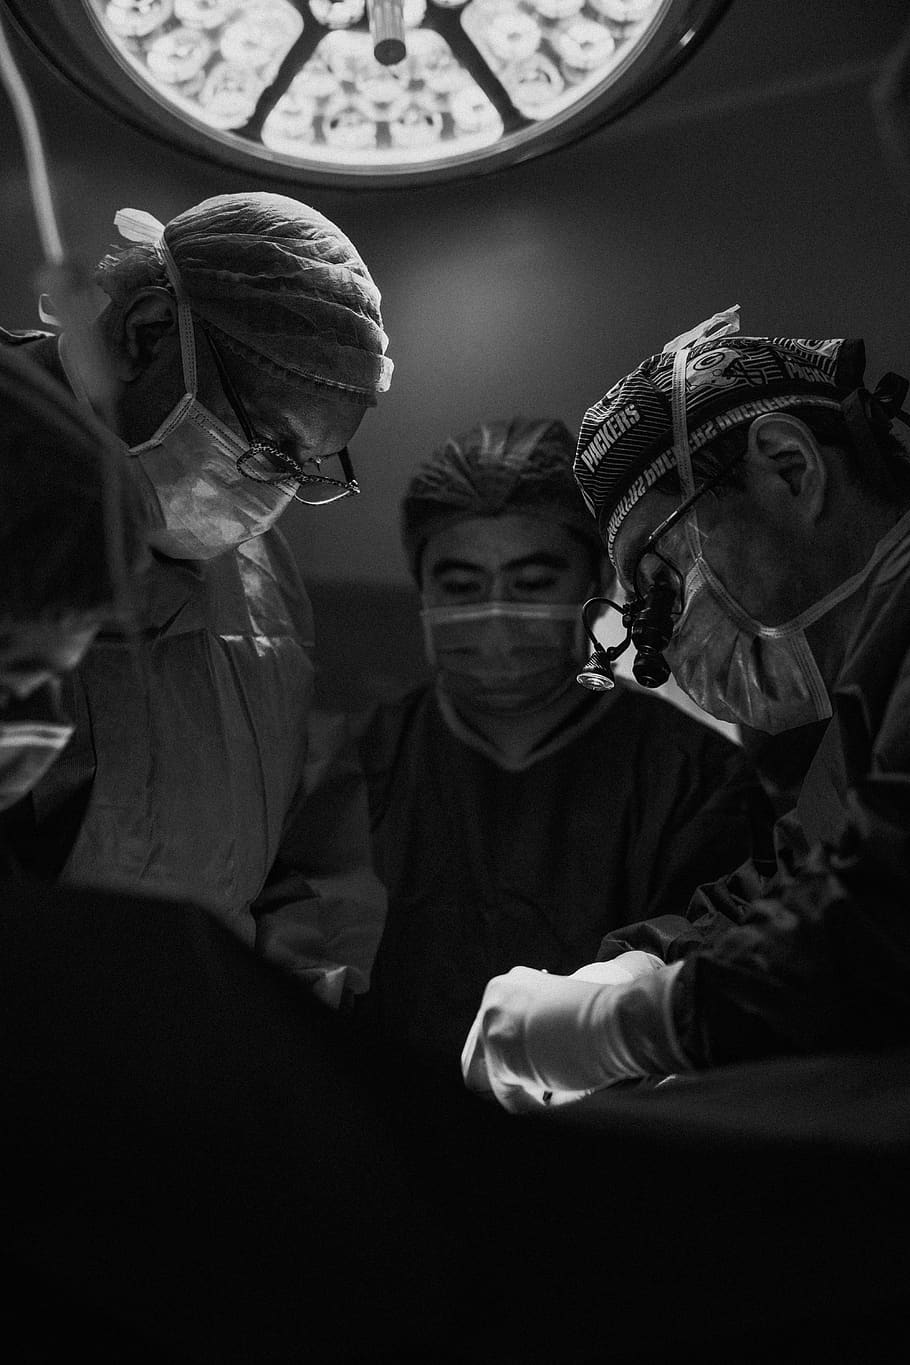 gray scale photo of three nurses and doctor about to surgery 910x1365 wallpaper teahub io gray scale photo of three nurses and